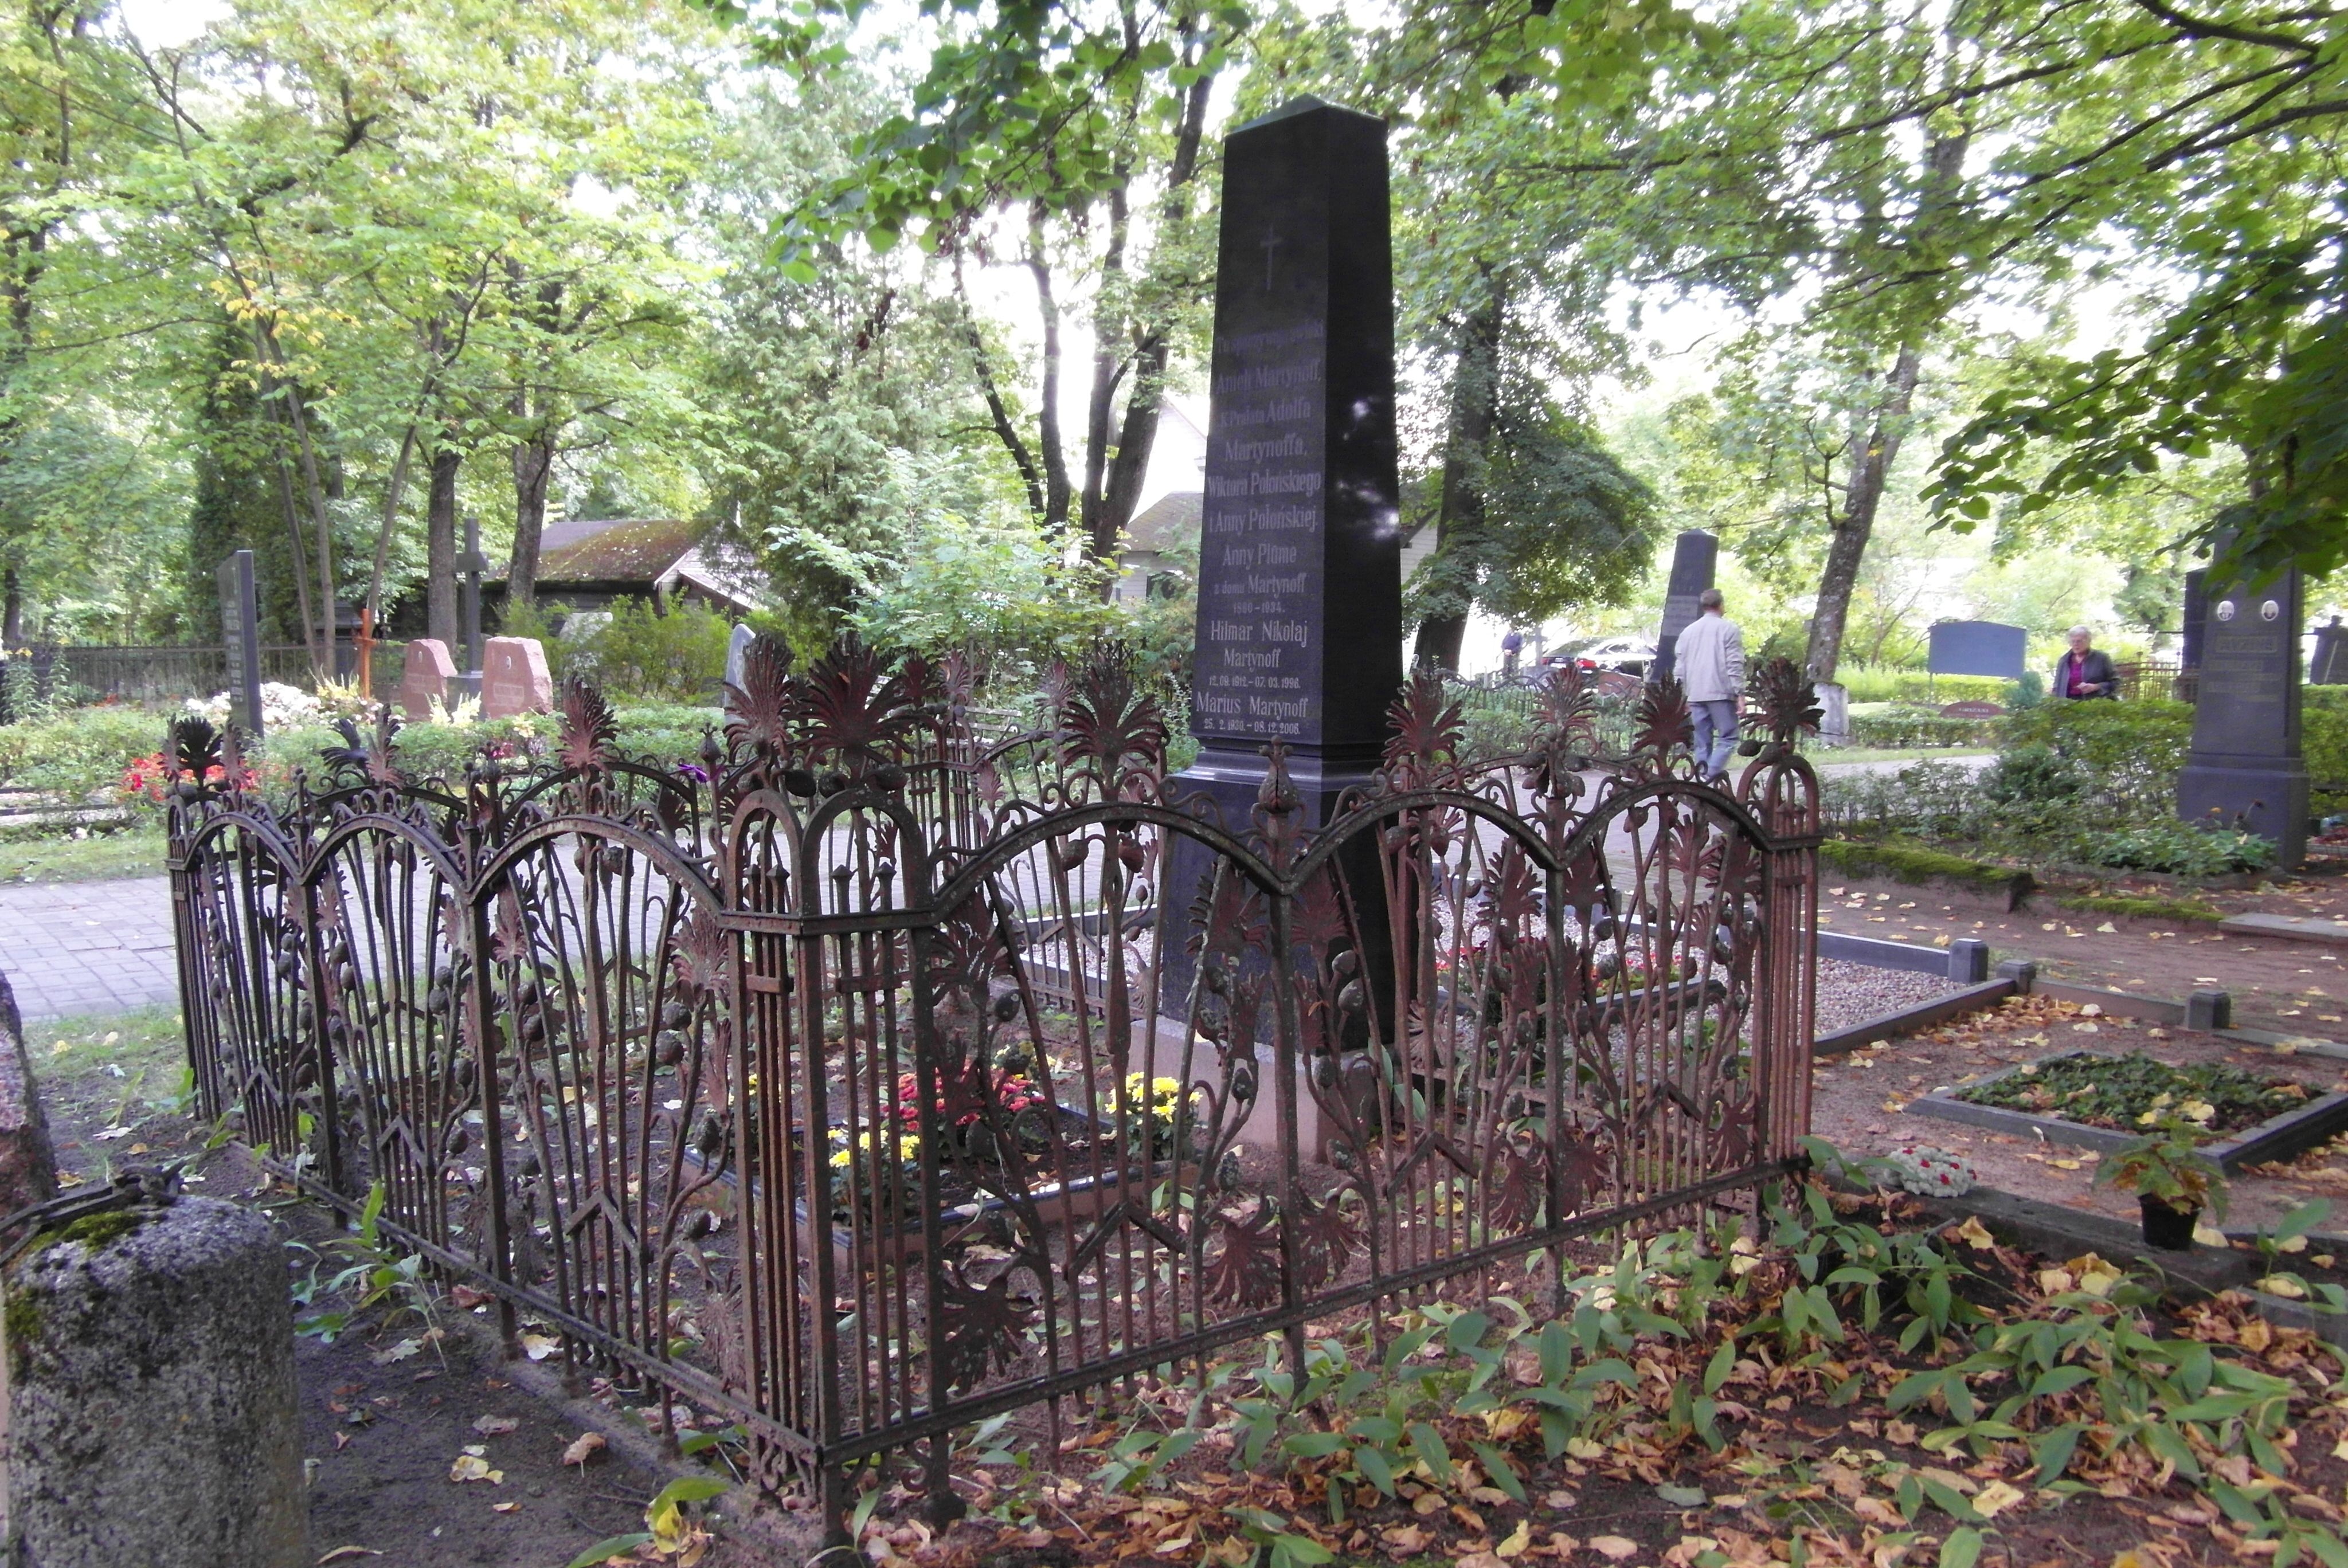 Martynoff family tombstone, St Michael's cemetery in Riga, as of 2021.